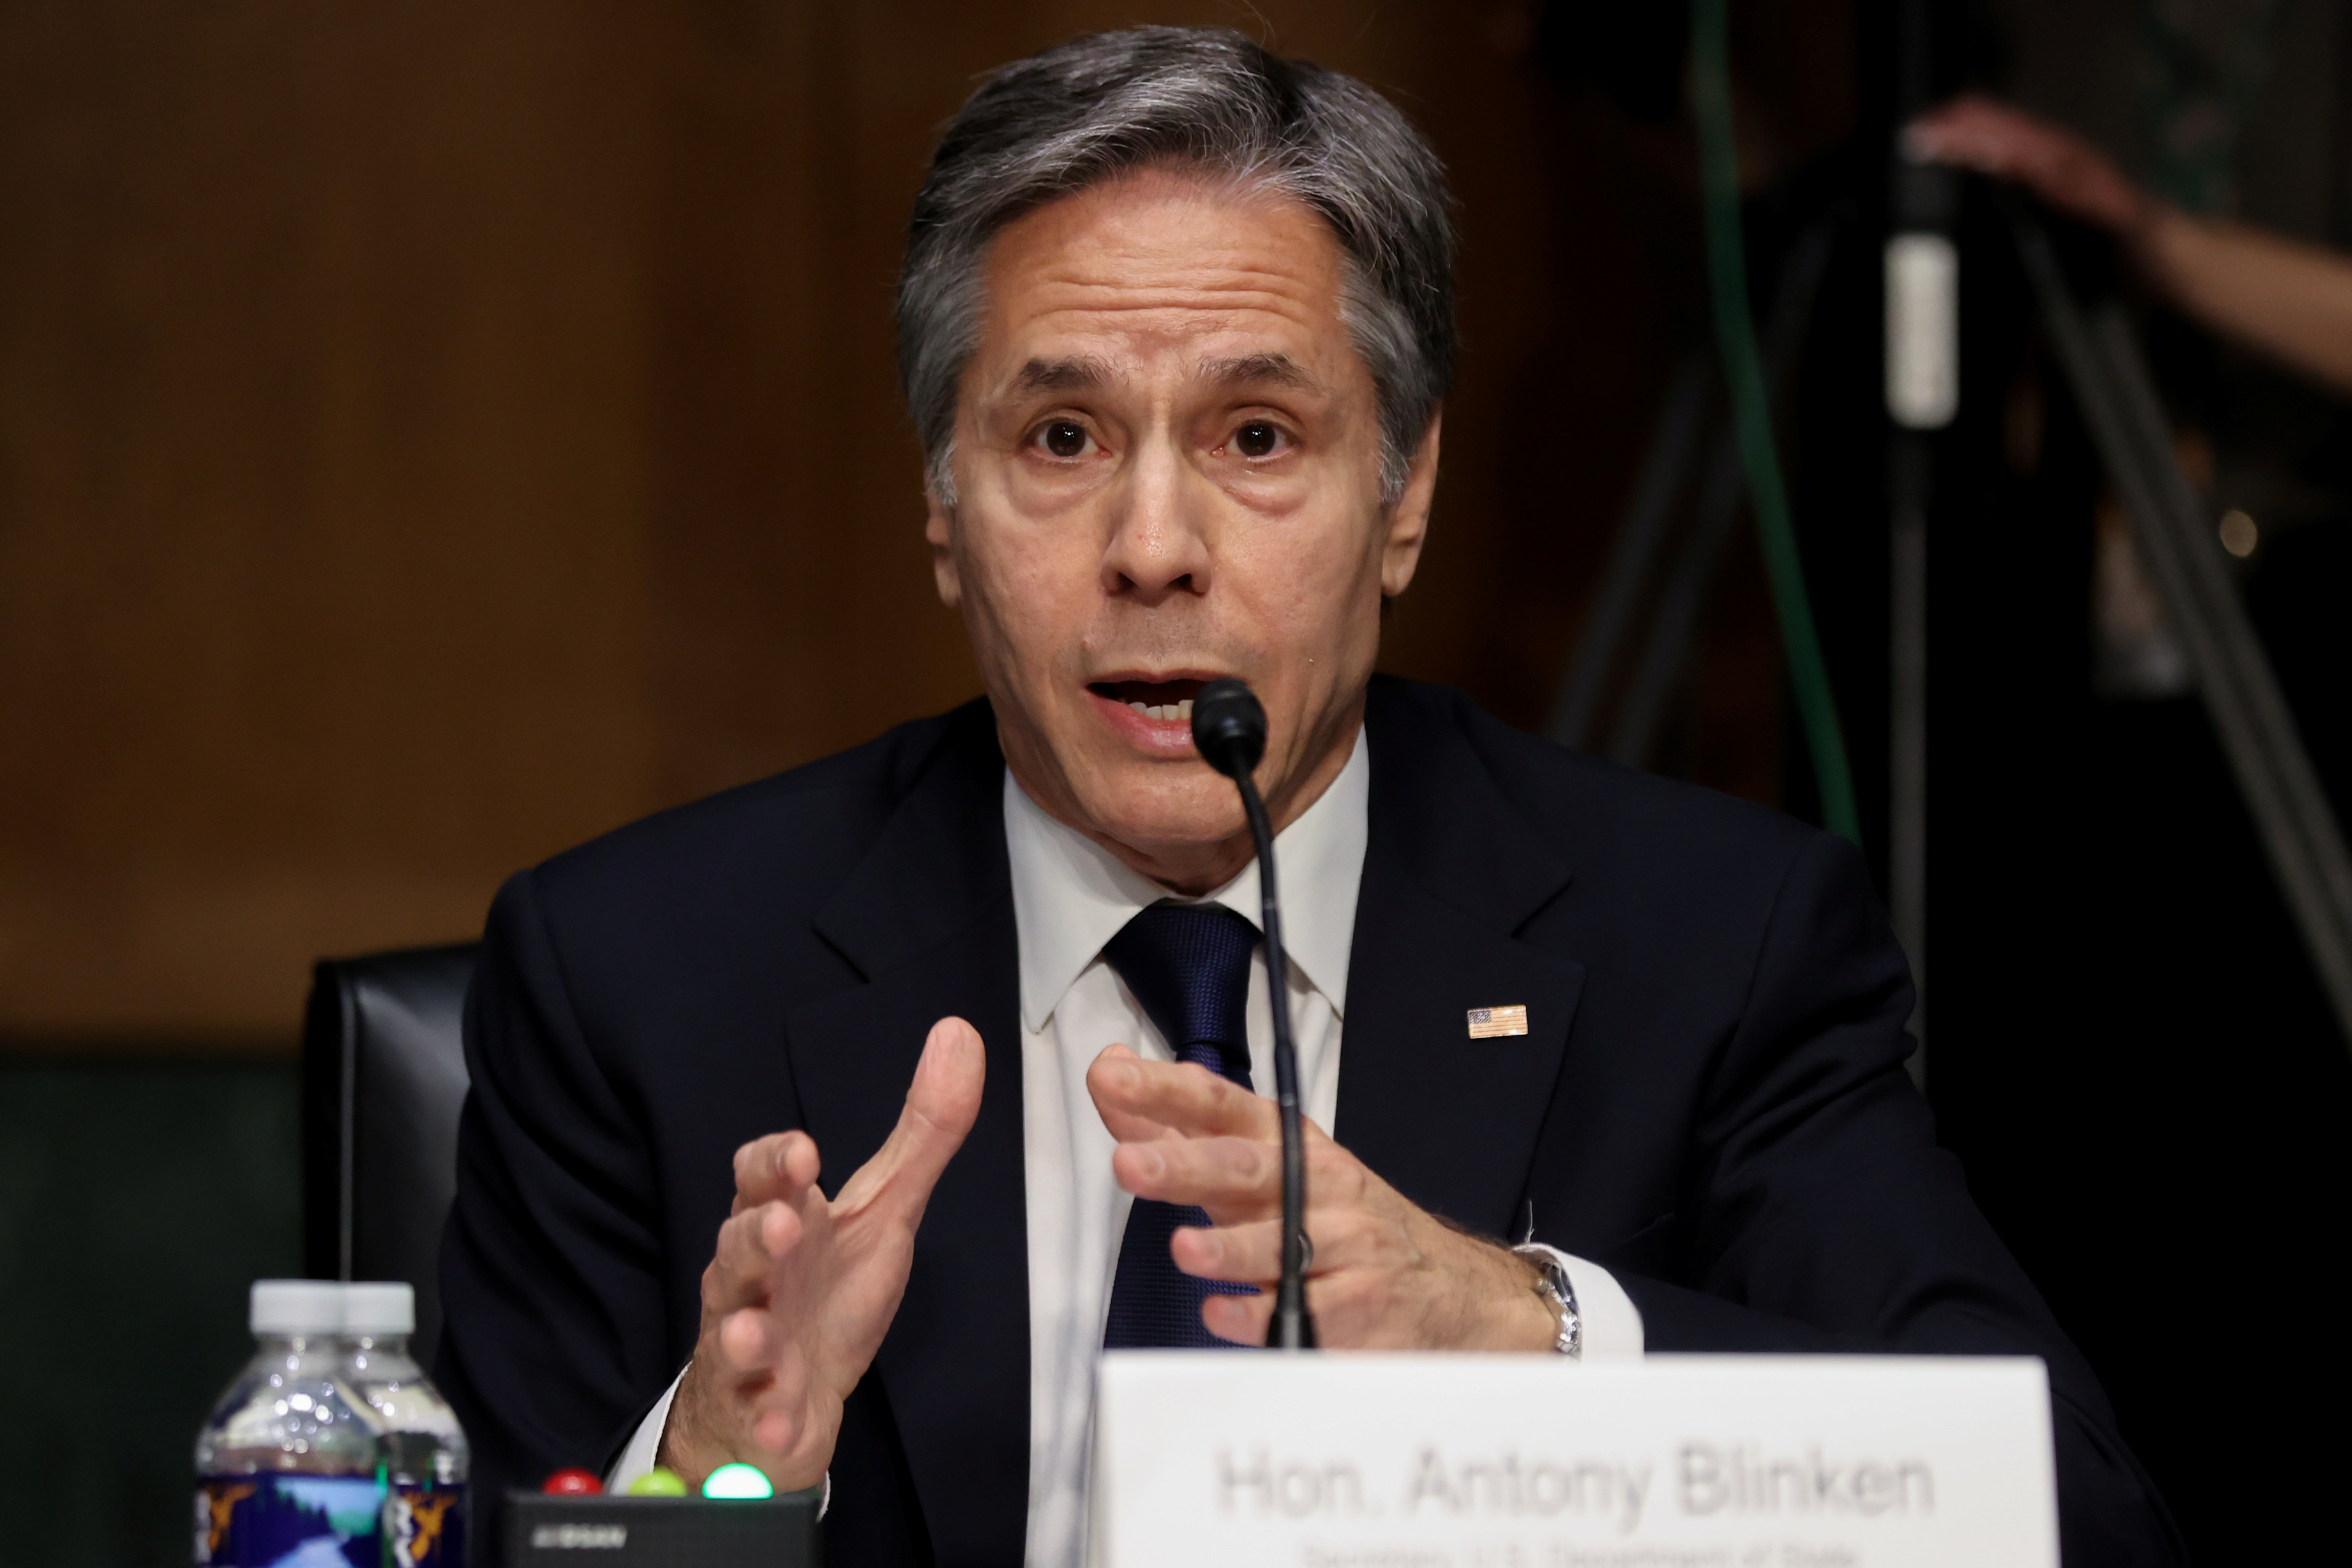 U.S. Secretary of State Blinken testifies about the State Department budget before the Senate Appropriations Committee on Capitol Hill in Washington